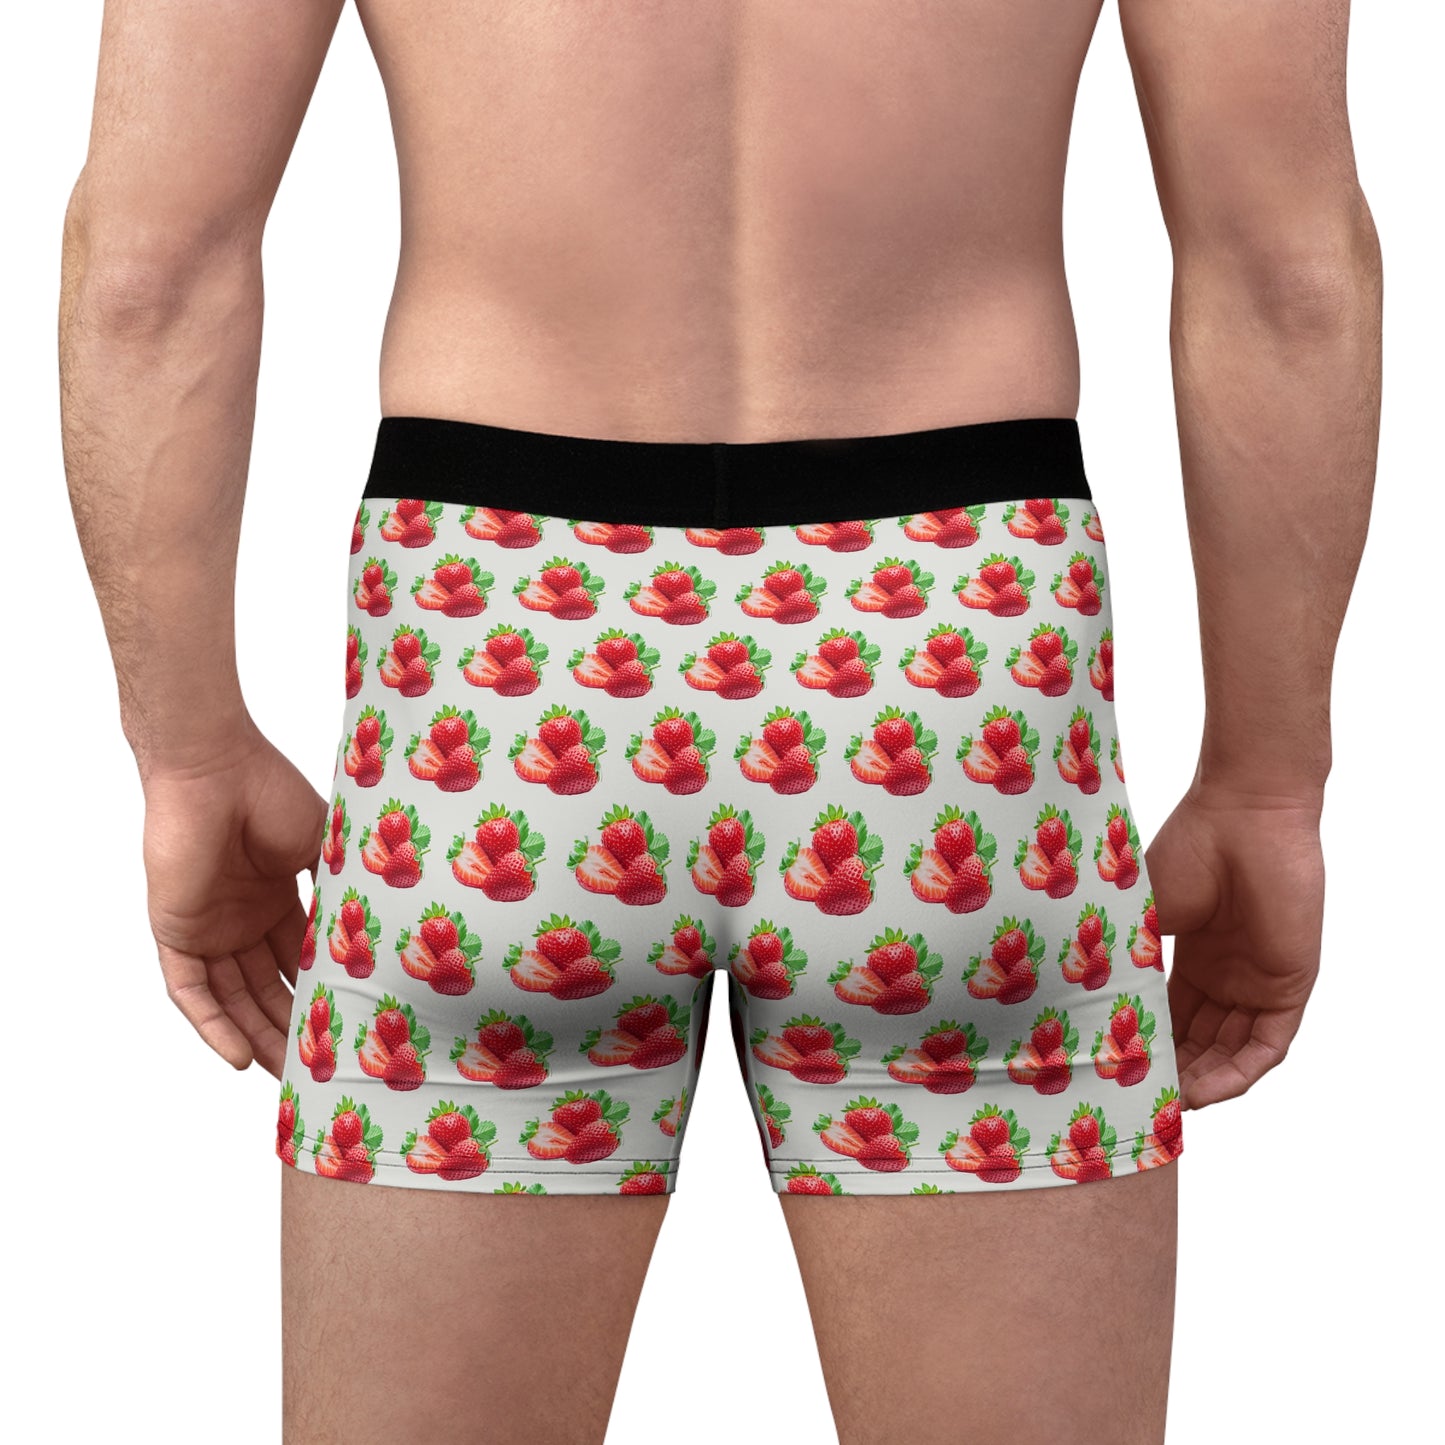 Succulent Strawberry Boxer Briefs by Joe Exotic